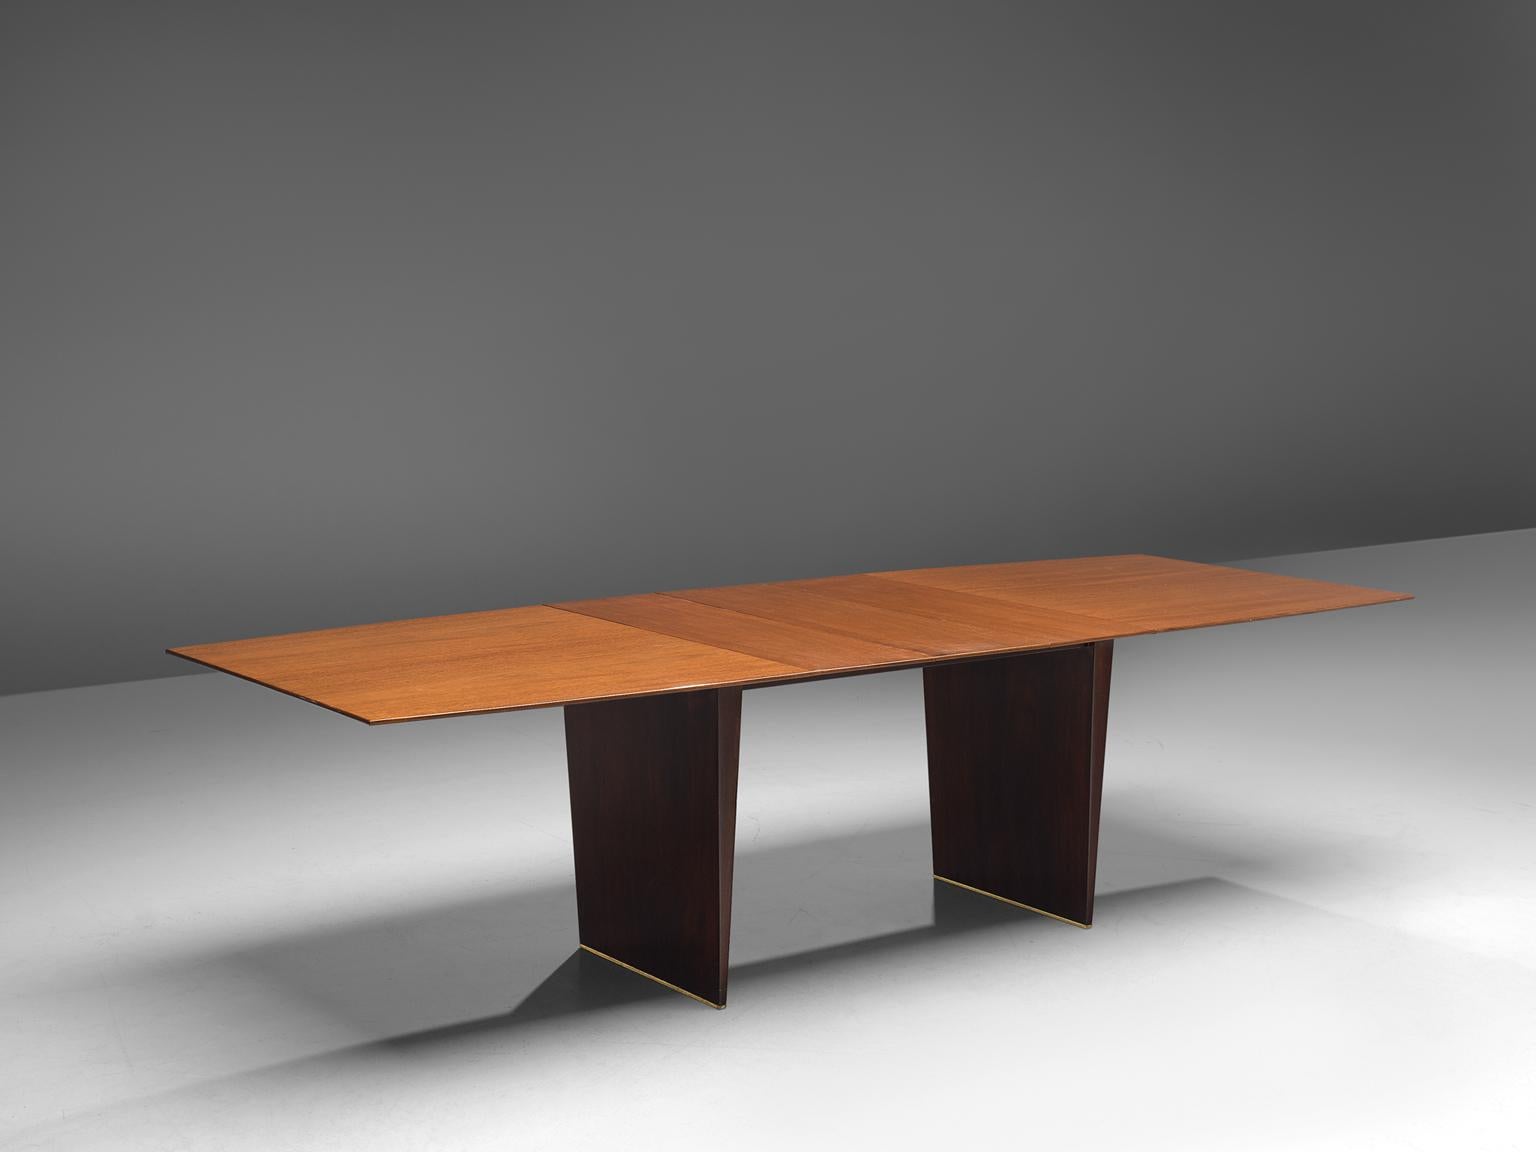 Edward Wormley for Dunbar, dining table, tawi wood, The United States, 1960s

Wonderful boat-shaped dining table designed by Edward Wormley in the 1960s. The lacquered tabletop is made of tawi wood, which has a beautiful warm, honey color combined